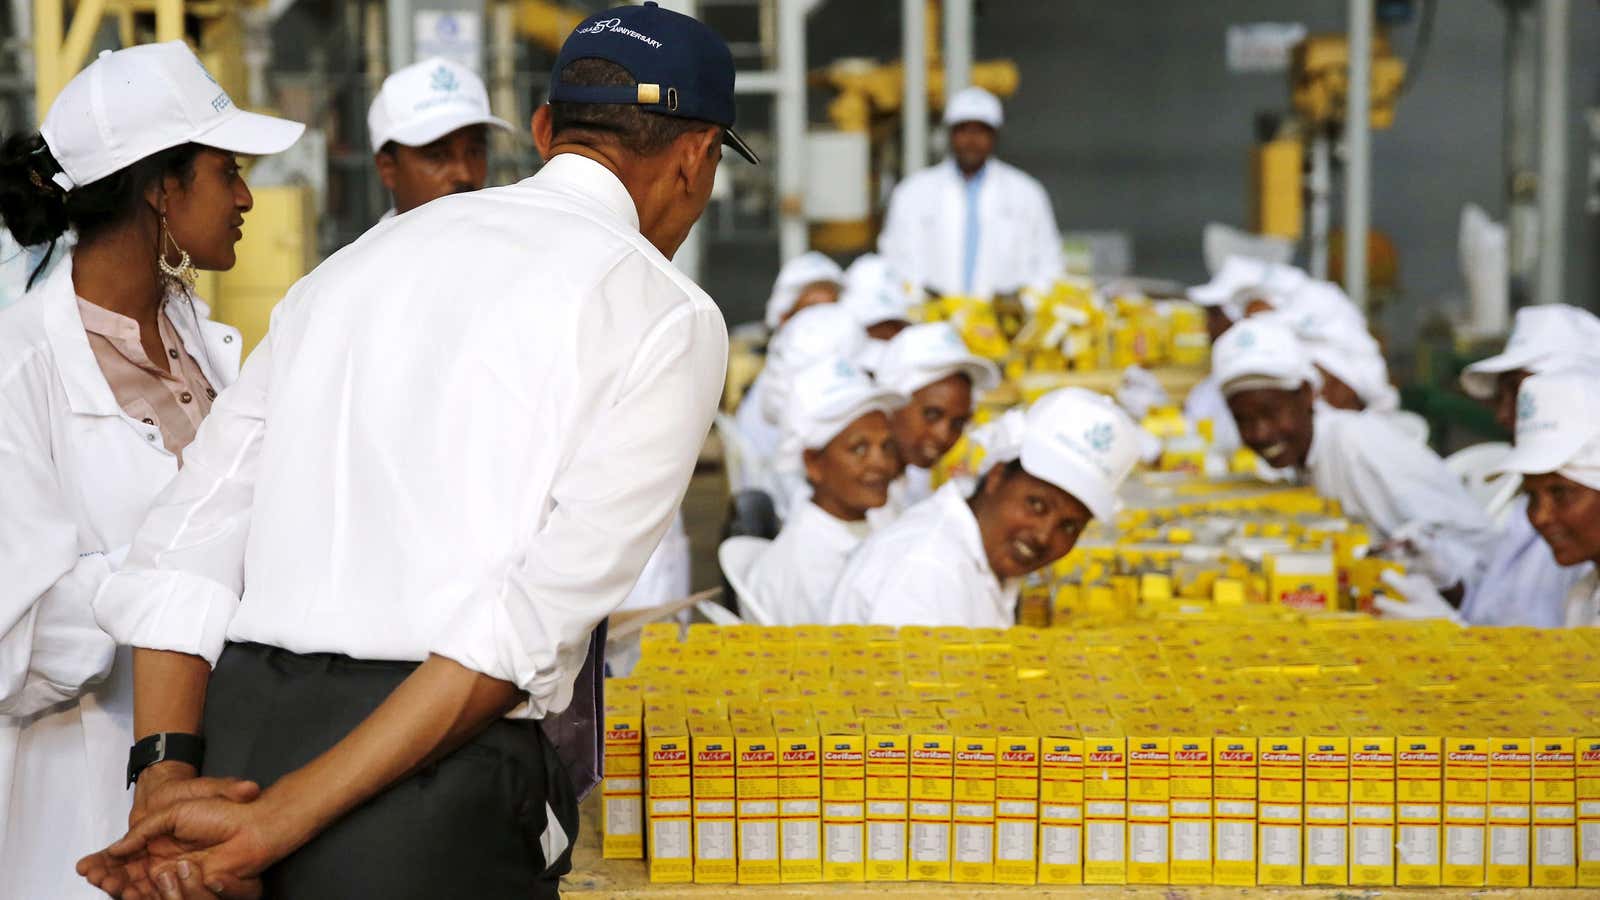 President Obama tours  a food factory in Addis Ababa, Ethiopia in 2015